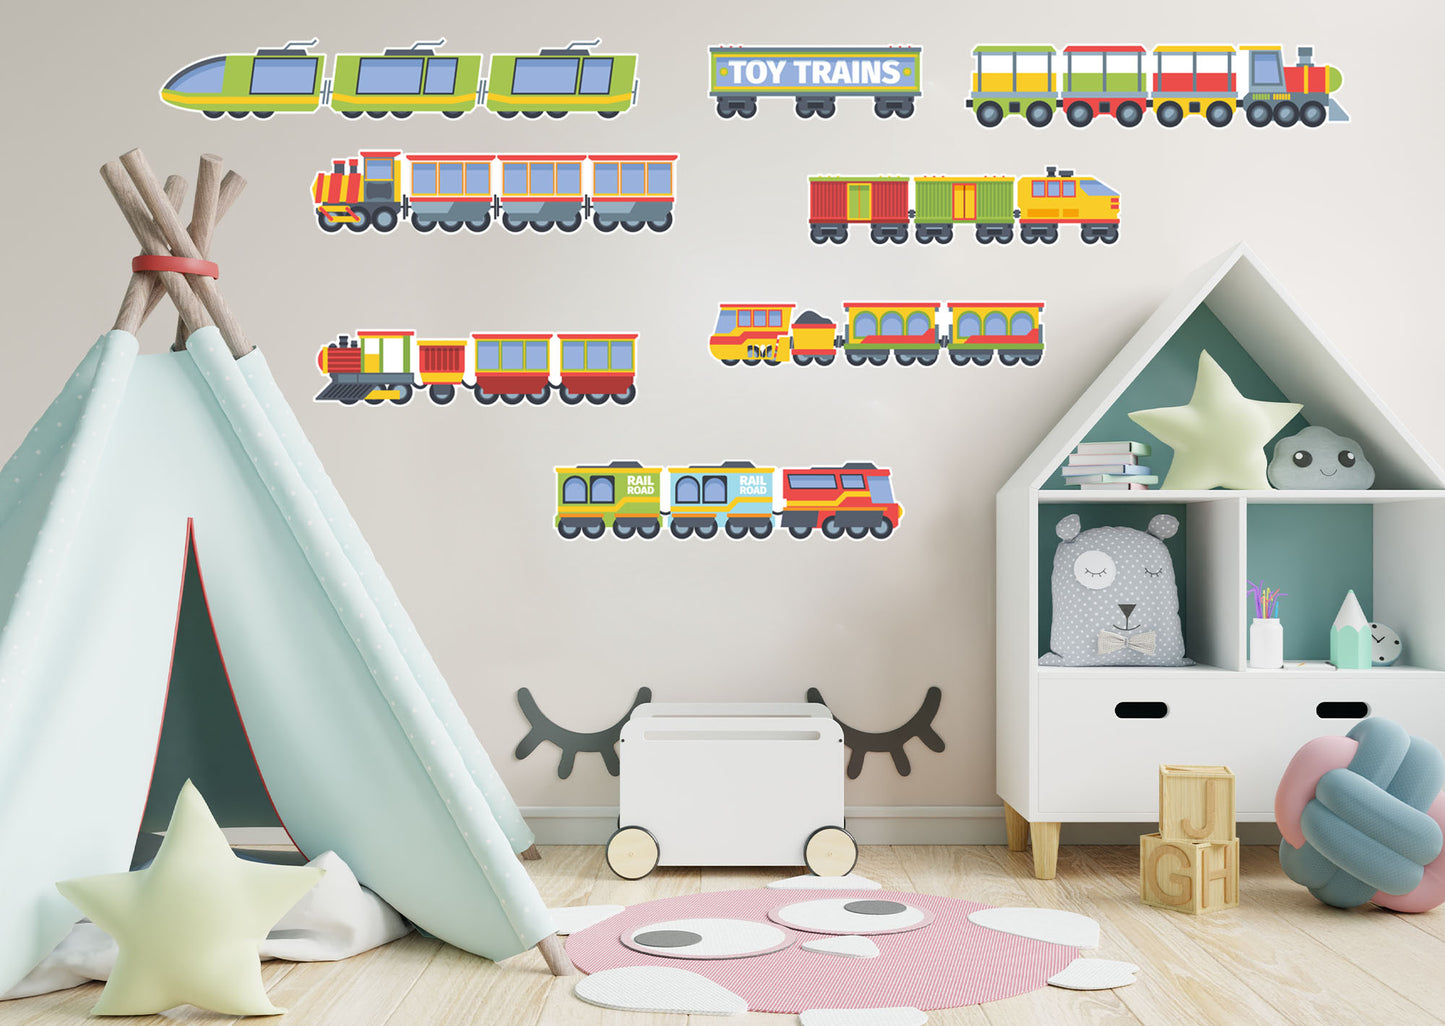 Nursery:  Rail Road Collection        -   Removable Wall   Adhesive Decal